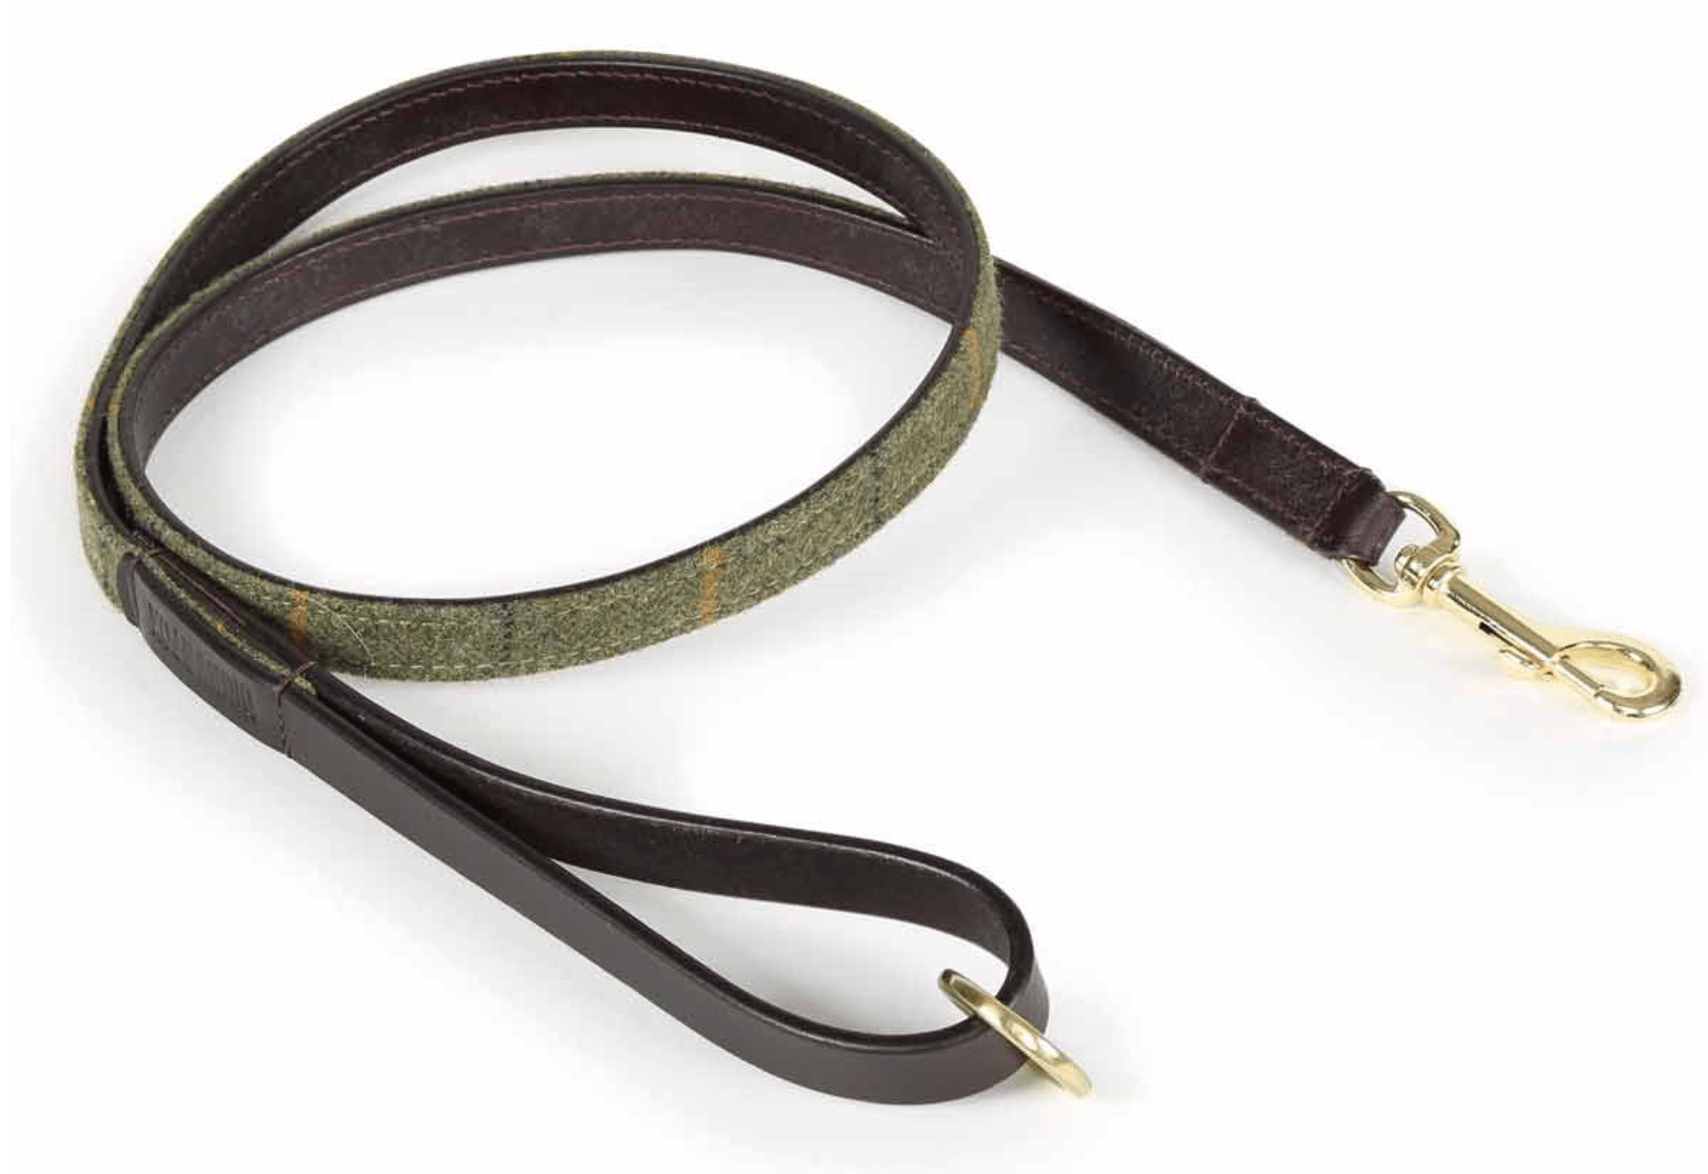 Digby & Fox Tweed Dog Lead - Red/Yellow/Blue Check